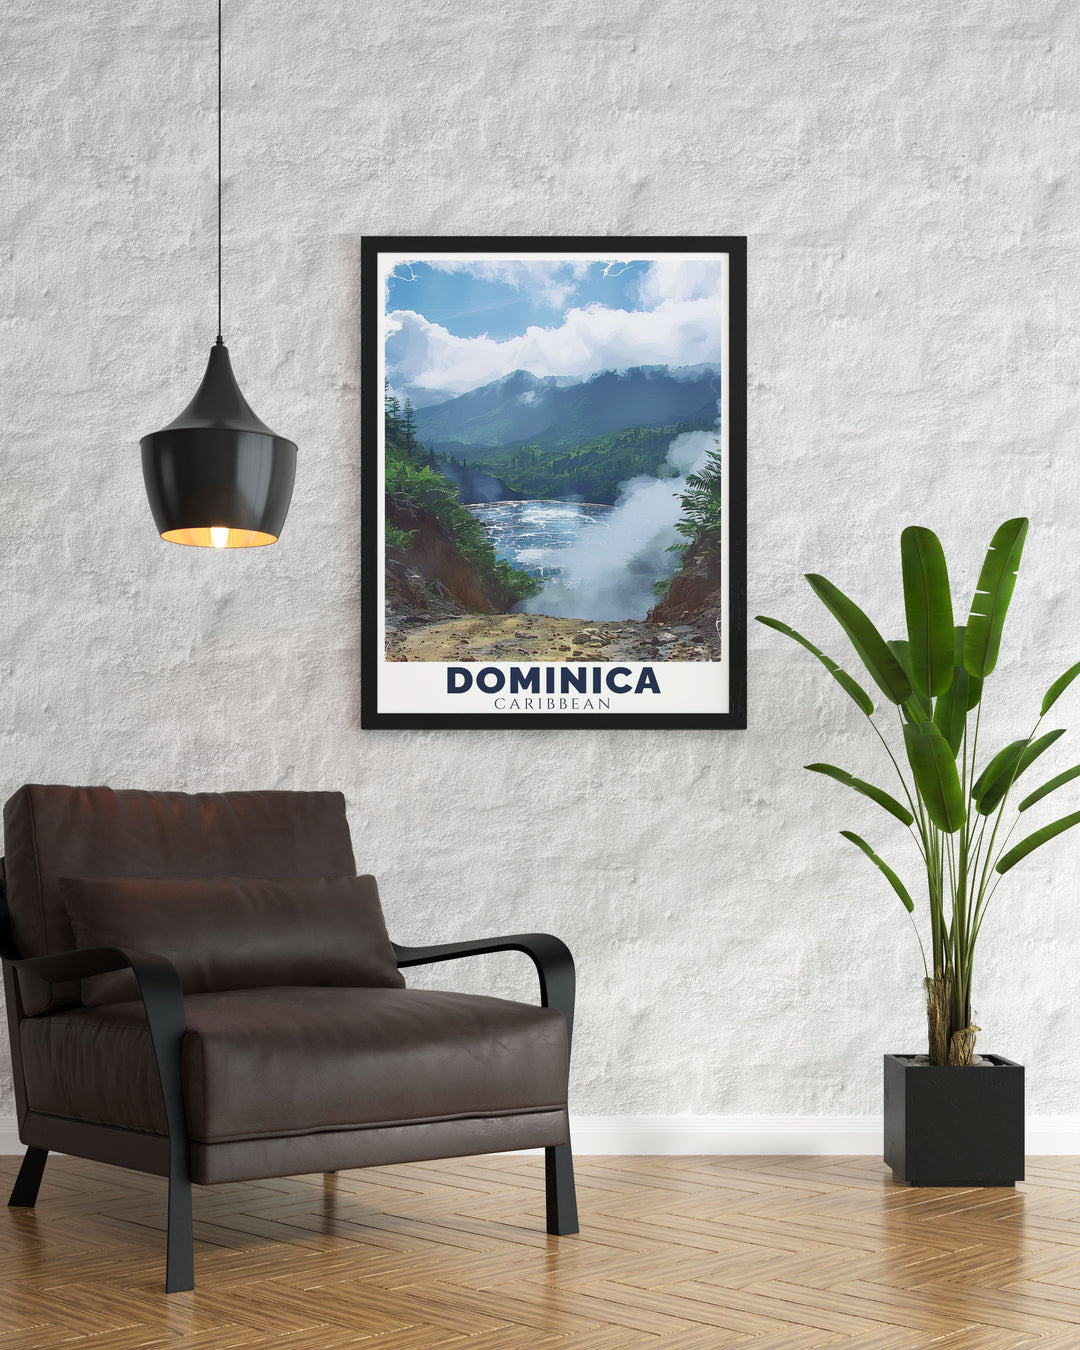 Boiling Lake Travel Print featuring the stunning natural beauty of Dominicas iconic boiling waters a captivating addition to any living space ideal as a travel gift or unique wall art for lovers of the Caribbean